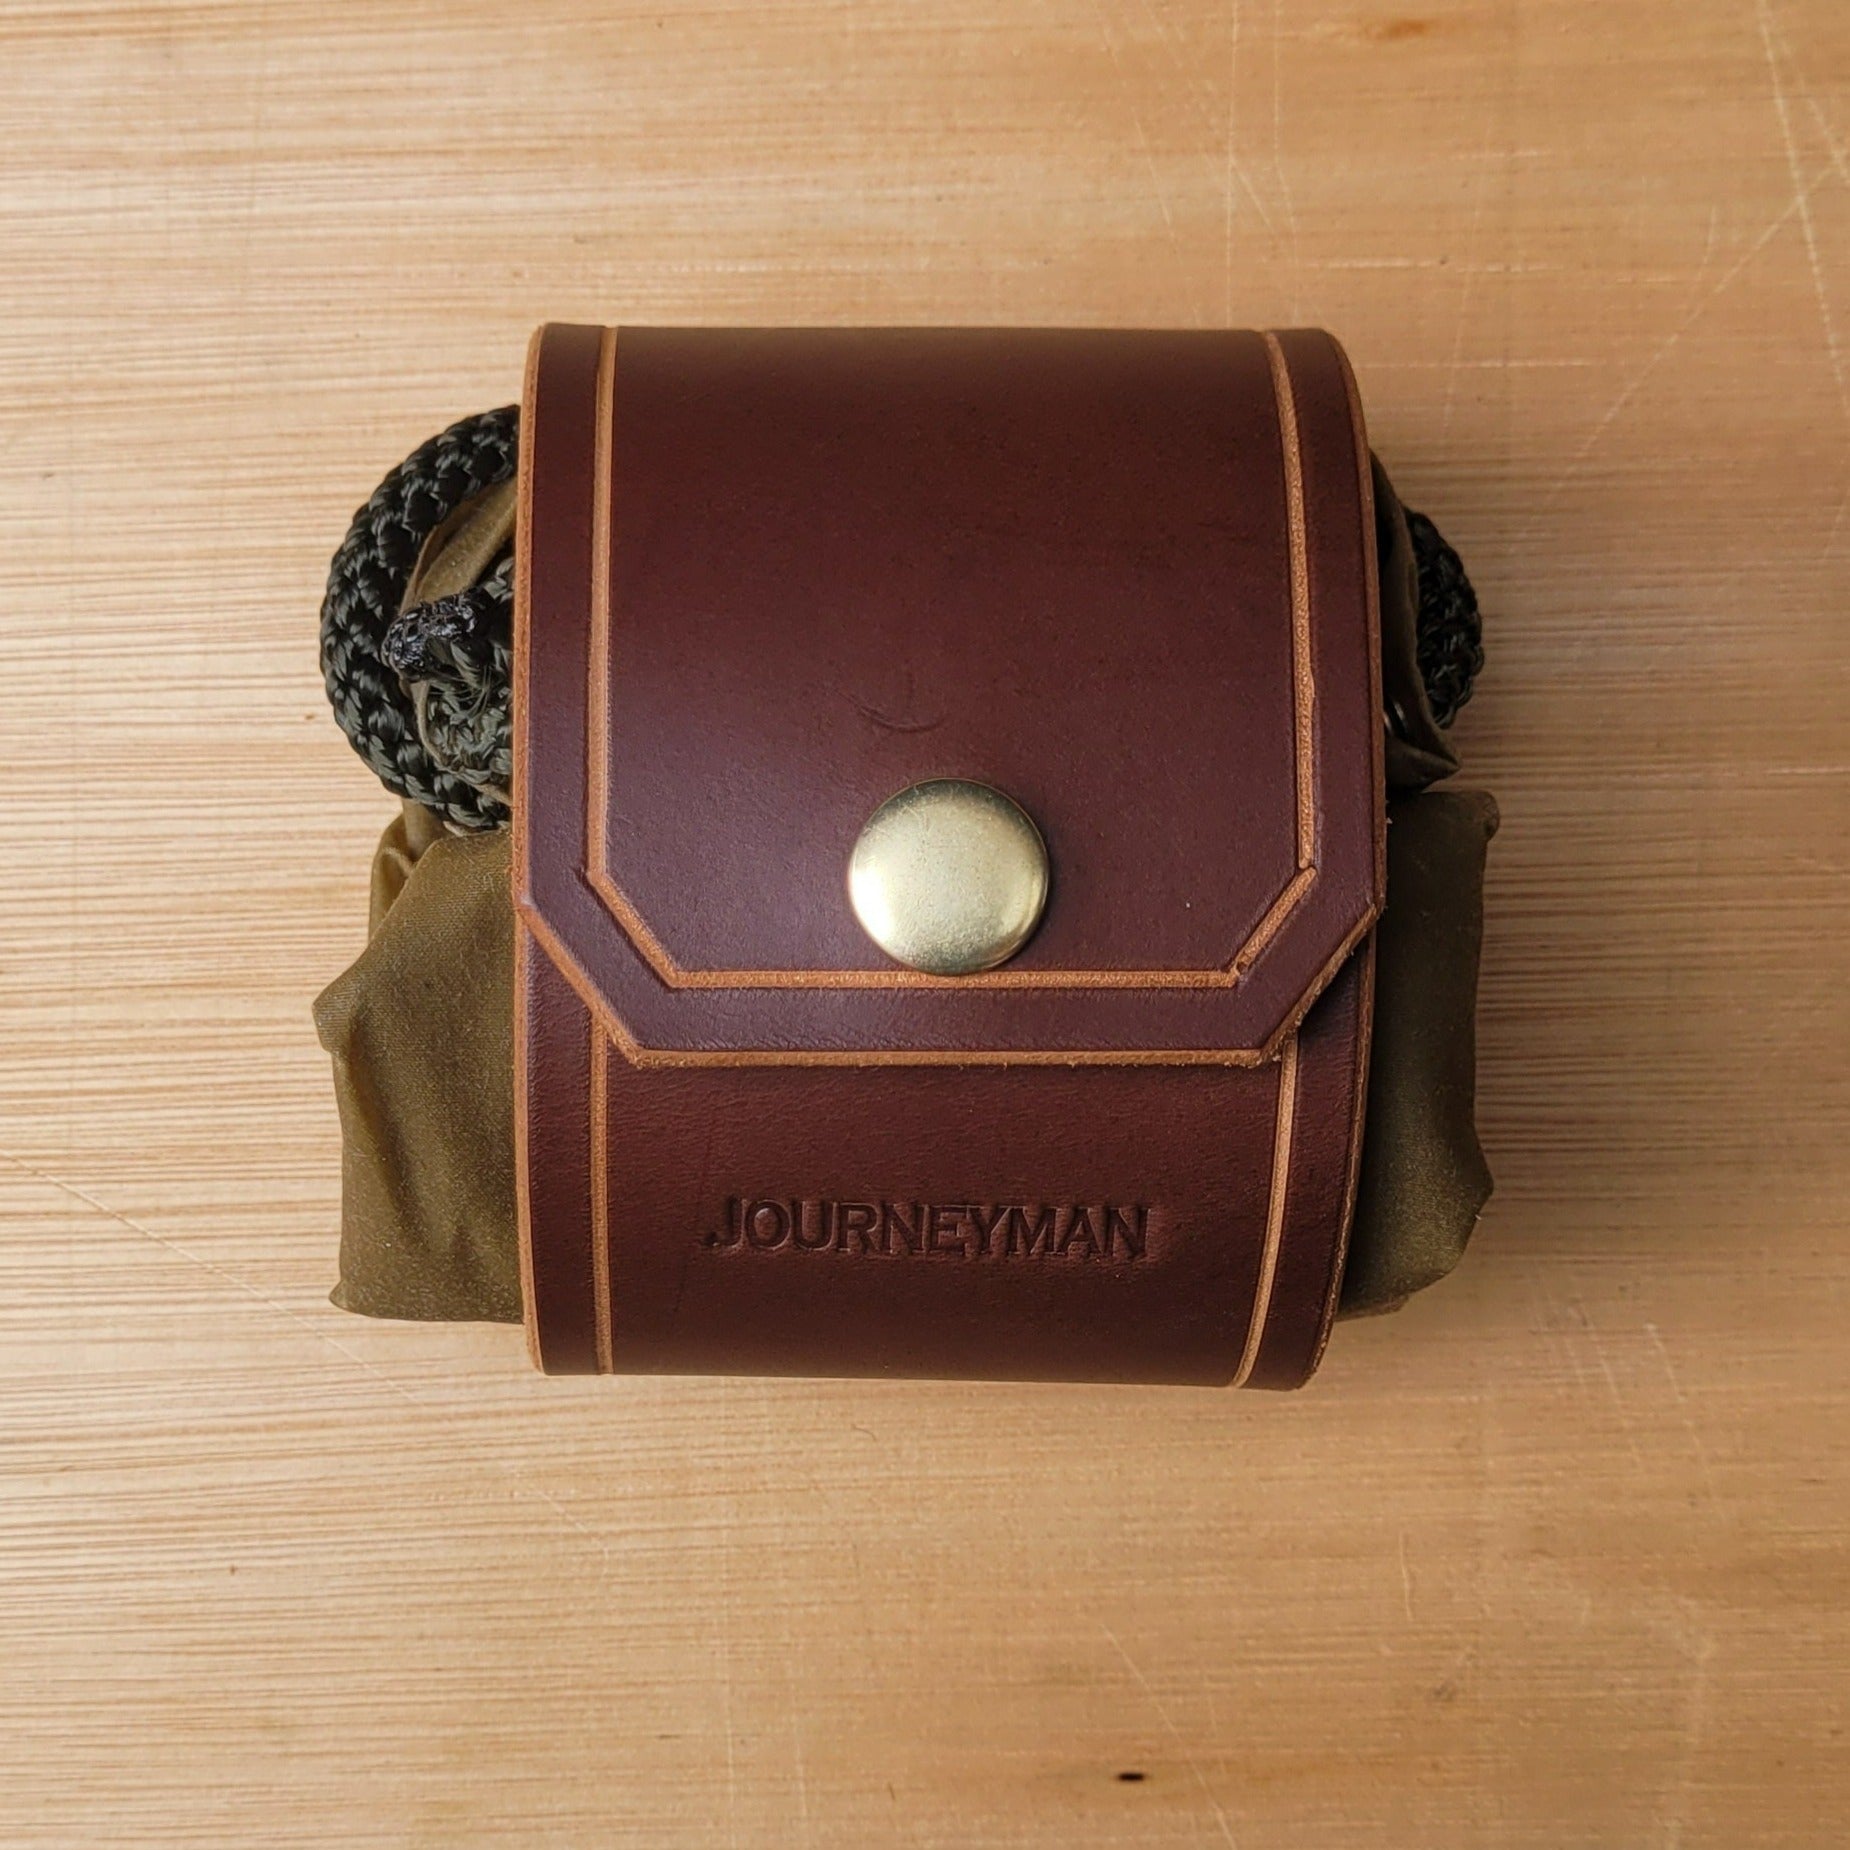 A folded forager dump pouch made from canvas and leather